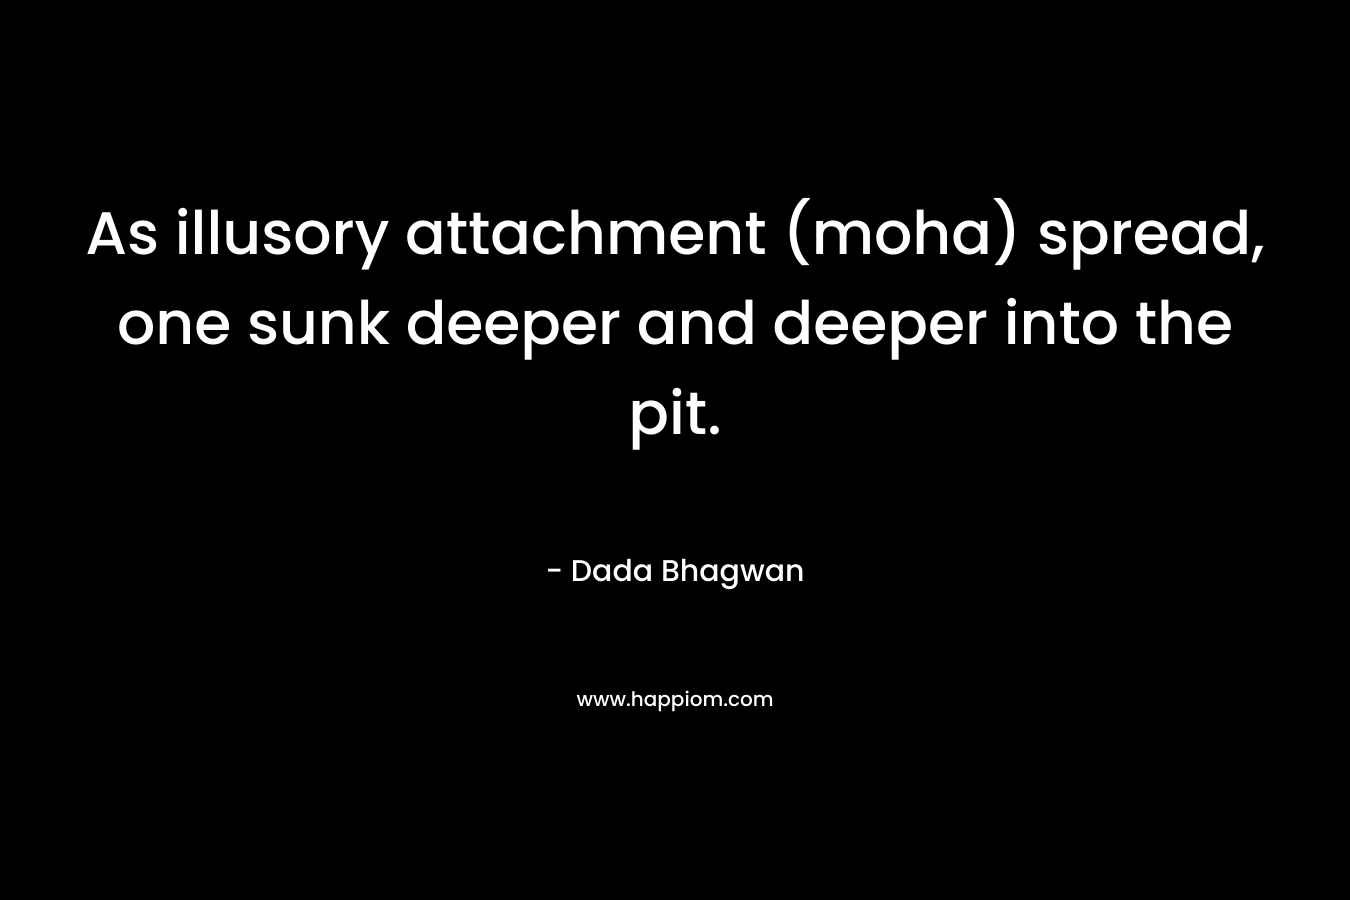 As illusory attachment (moha) spread, one sunk deeper and deeper into the pit. – Dada Bhagwan